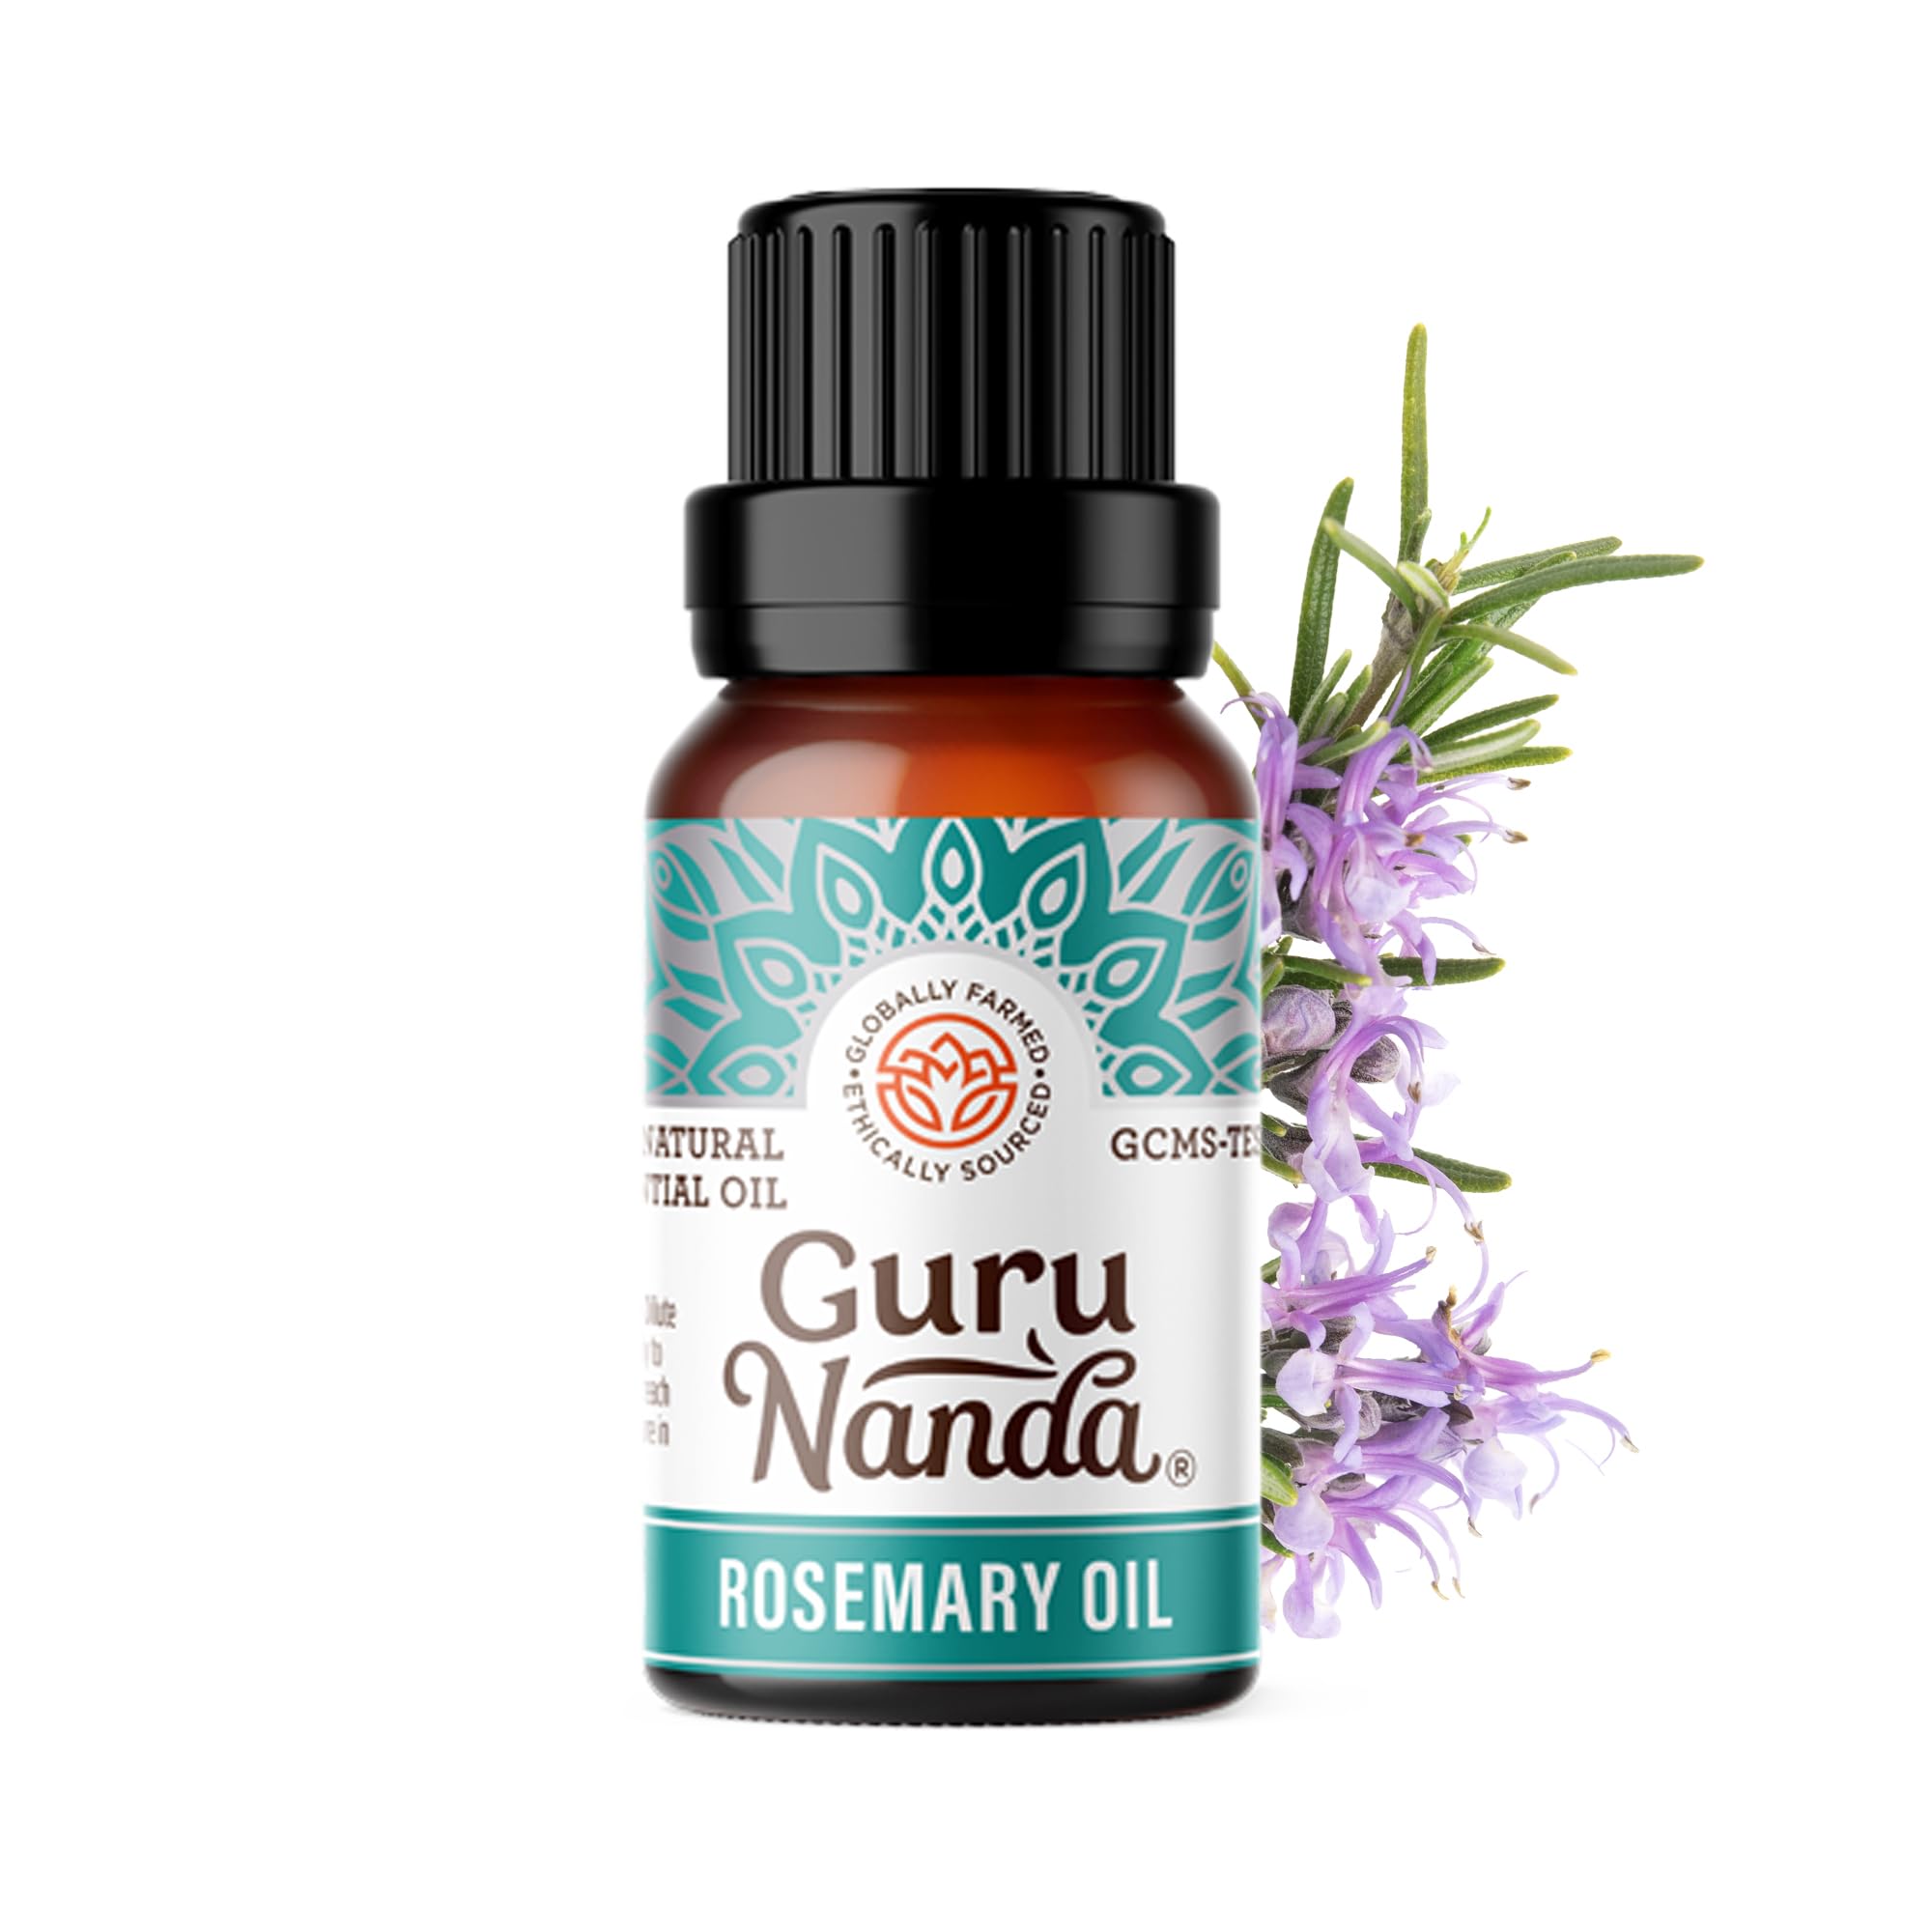 GuruNanda Rosemary Essential Oil - 100% Pure & Natural, Undiluted, Non-GMO - for Hair, Skin & Aromatherapy Diffuser - 15ML